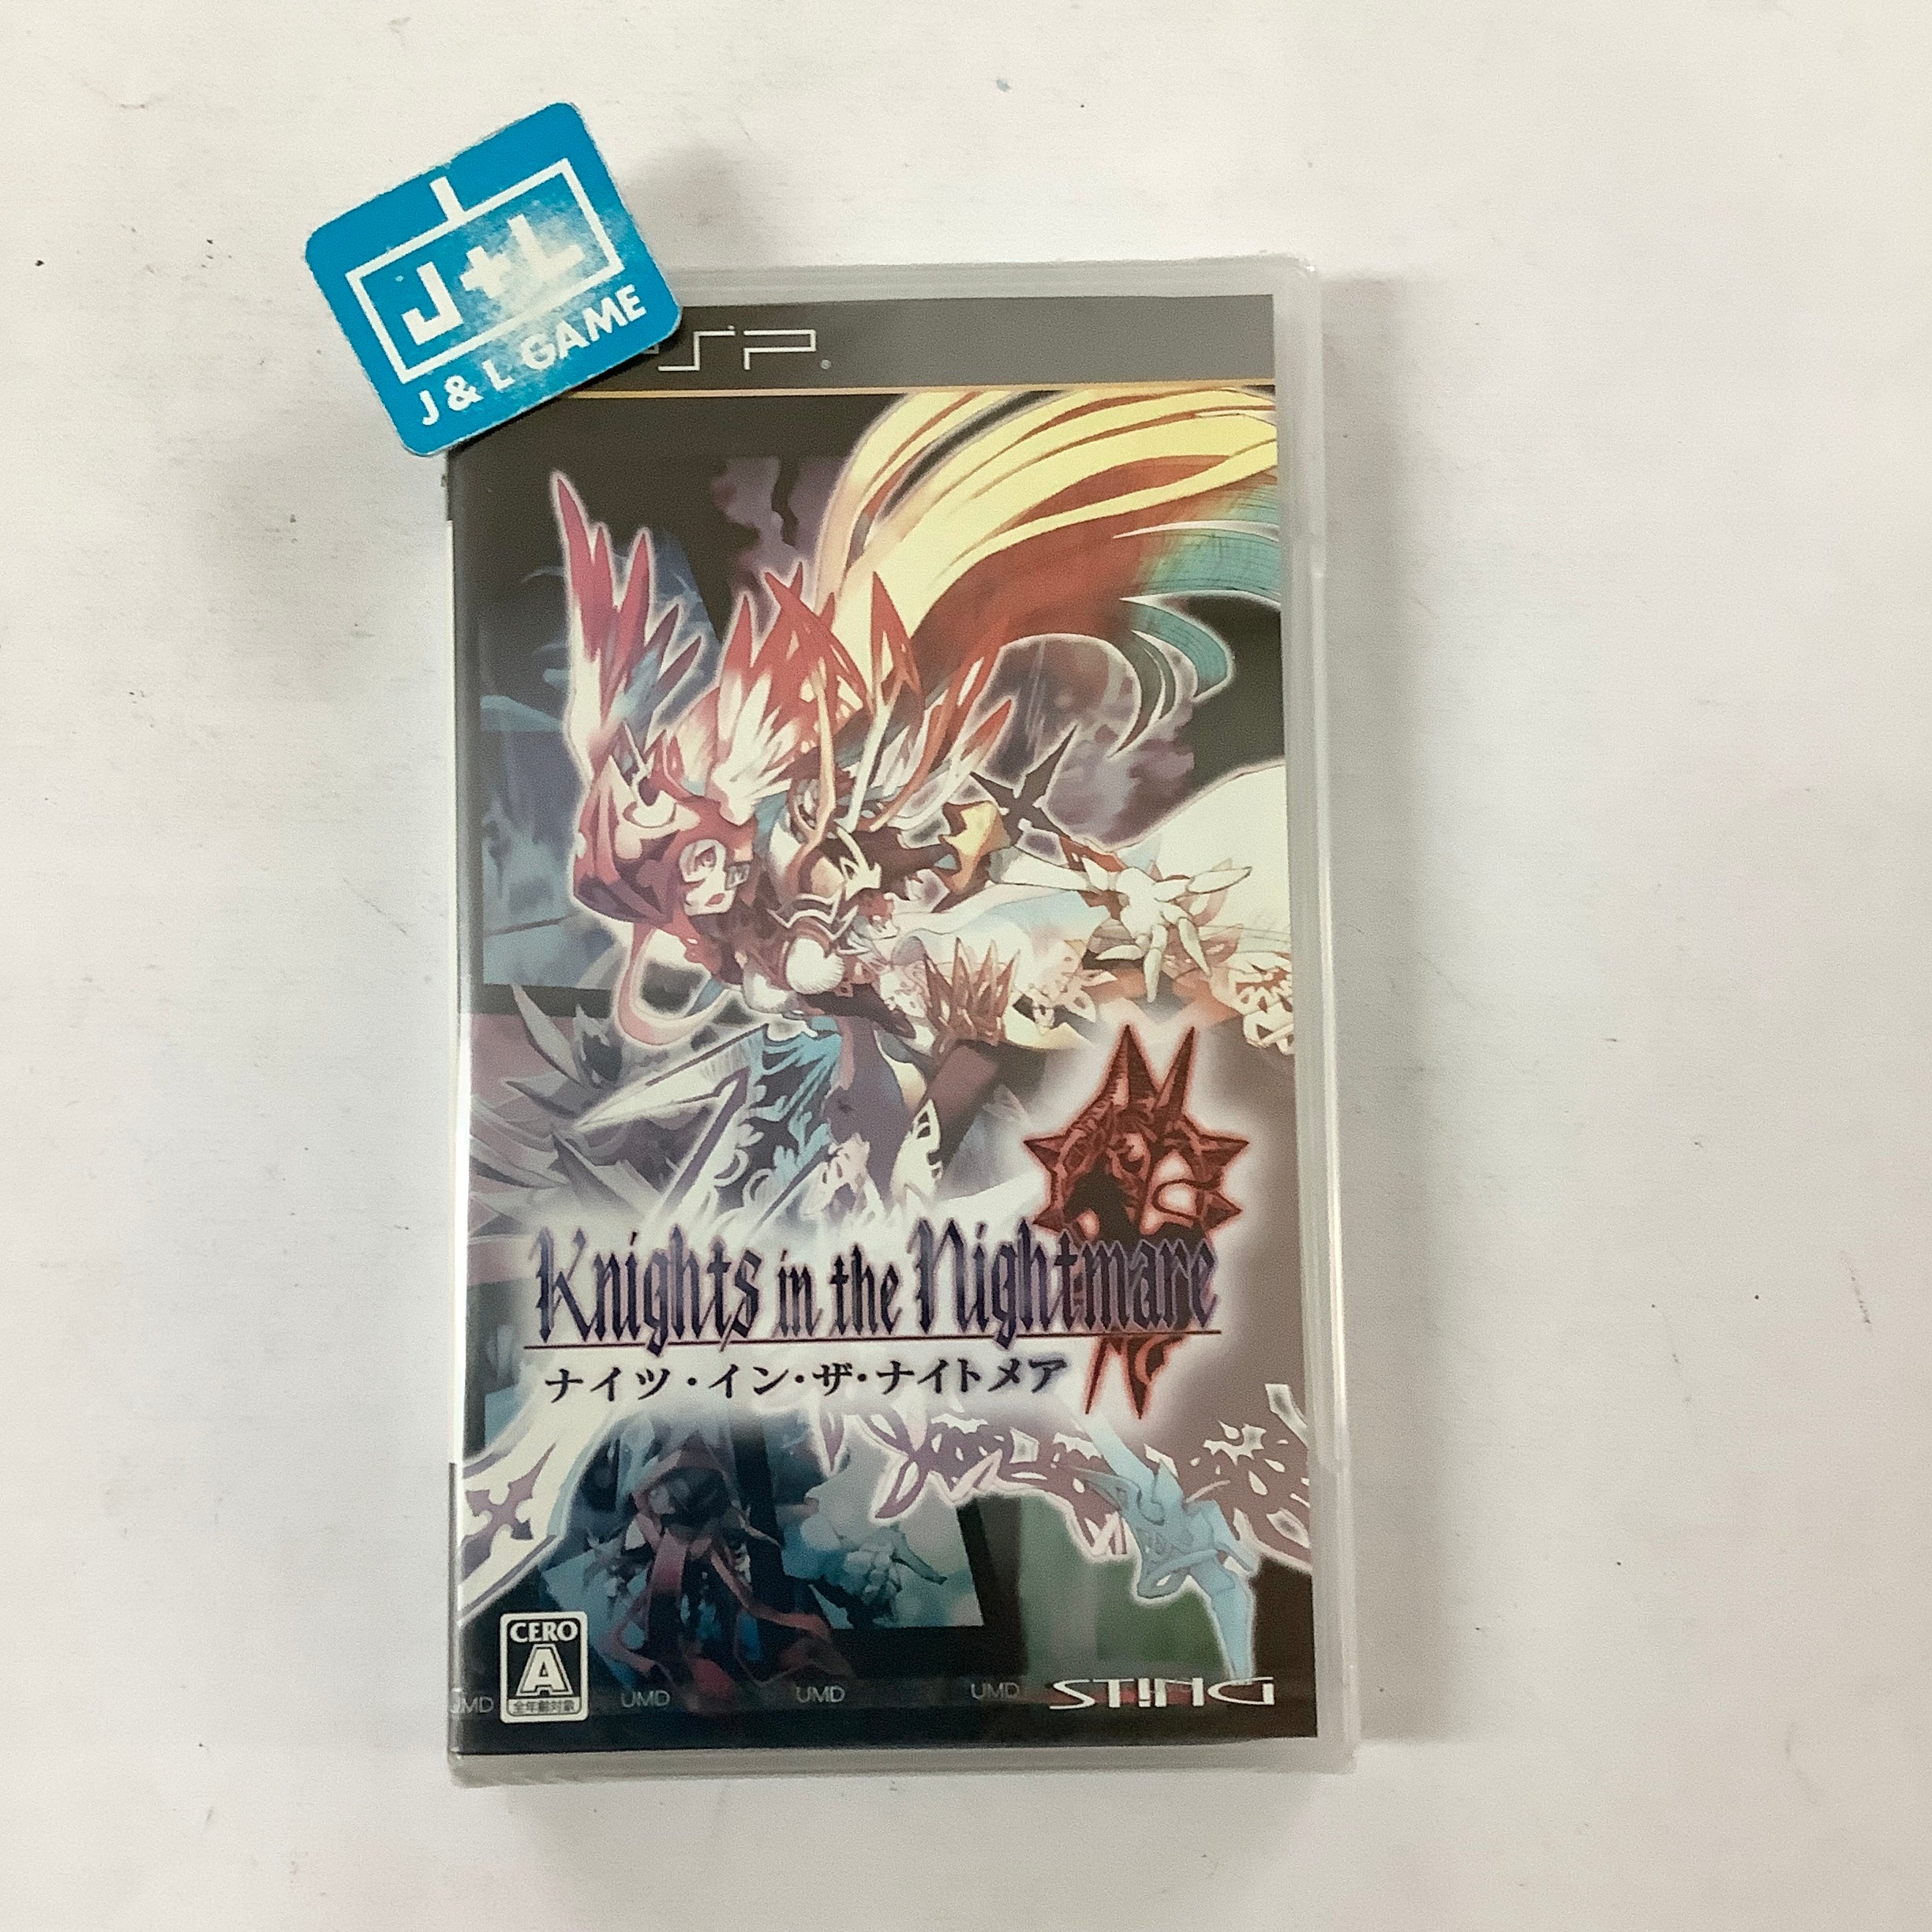 Knights in the Nightmare - Sony PSP (Japanese Import) Video Games Atlus   